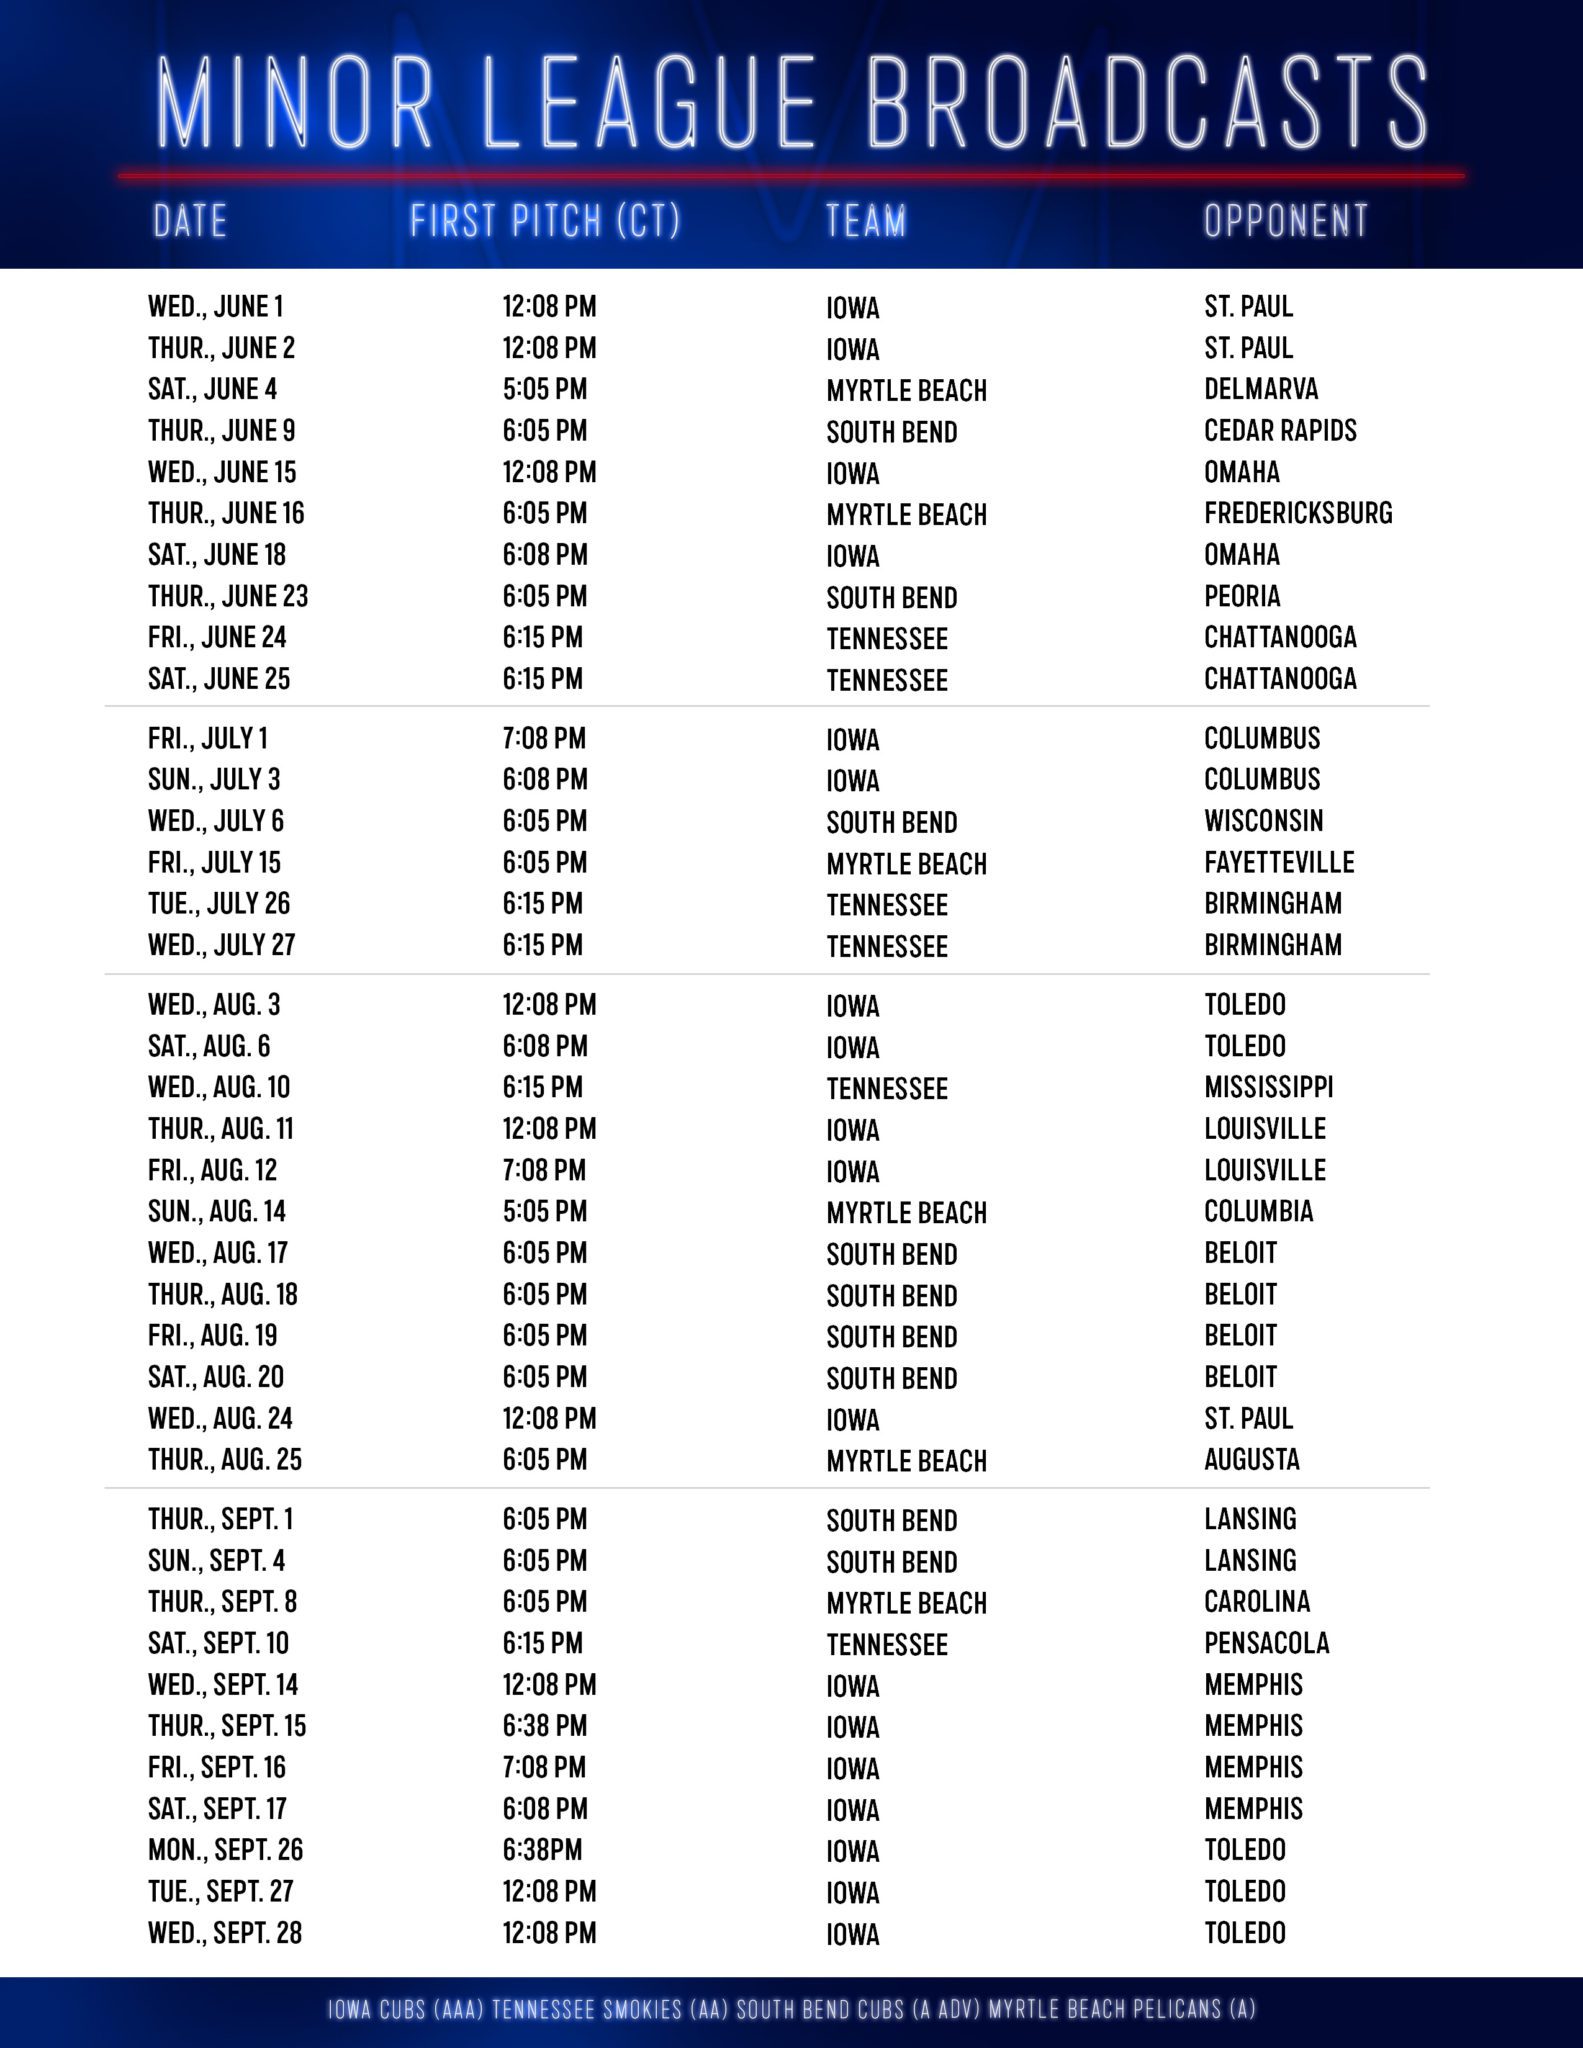 Marquee Announces Broadcast Schedule for 39 Upcoming Cubs Minor